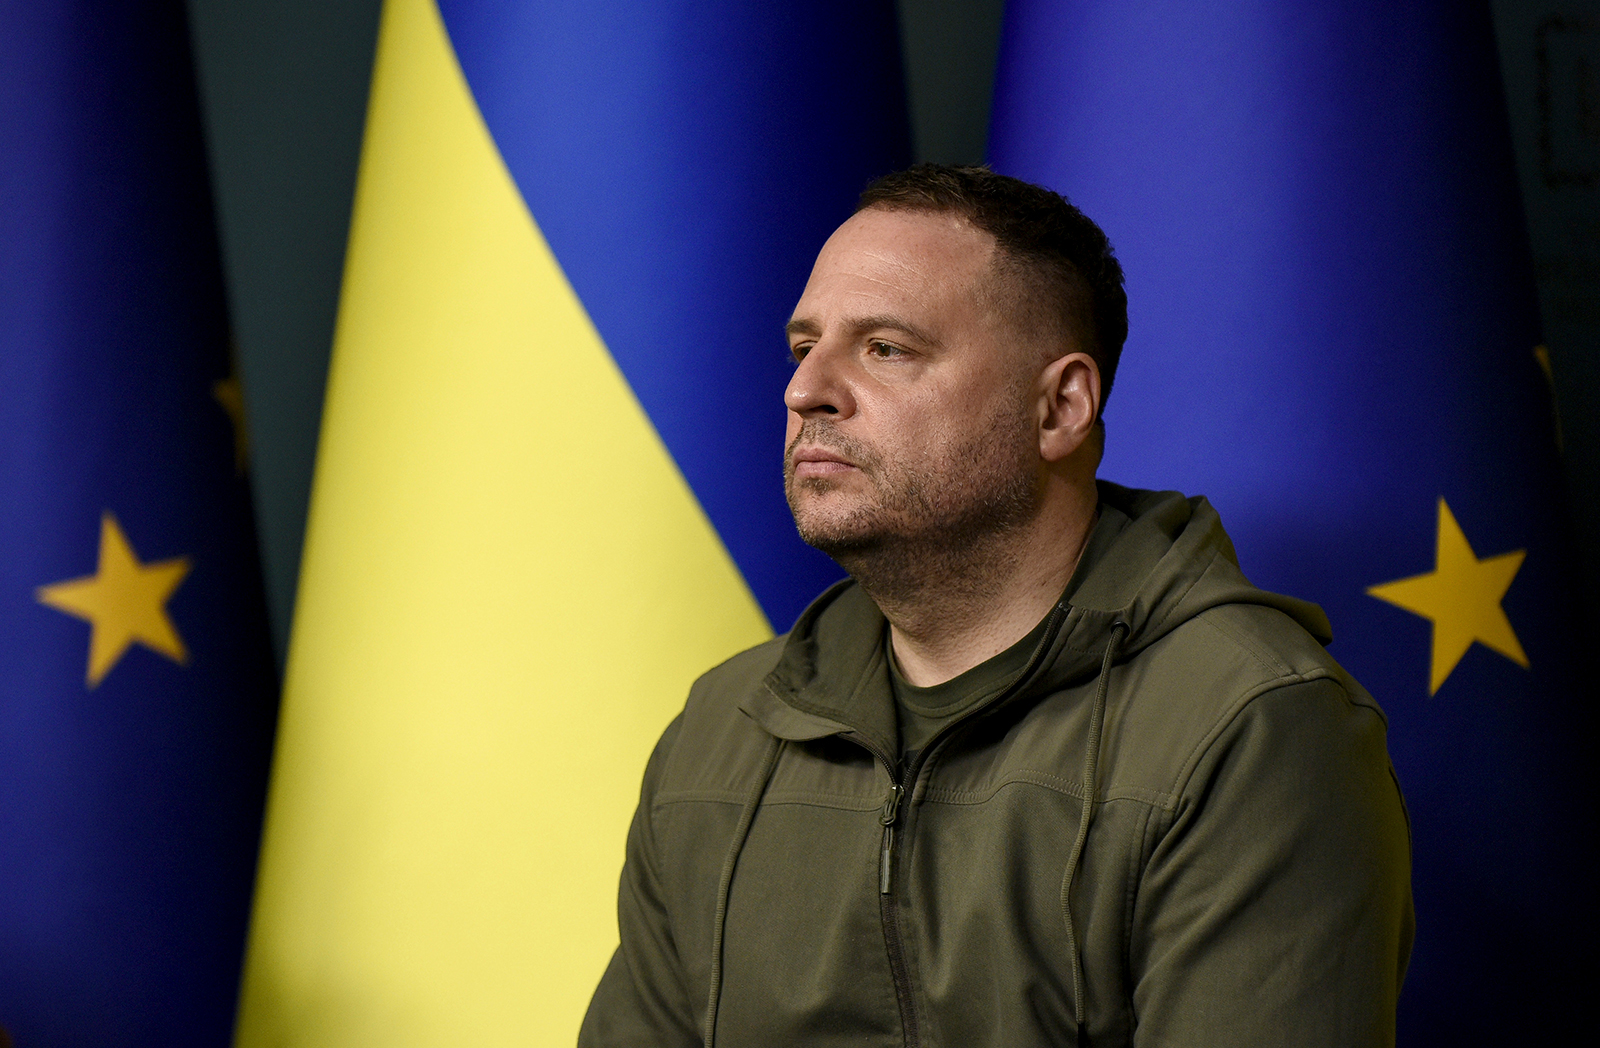 Andriy Yermak attends a briefing in Kyiv on December 2, 2022.